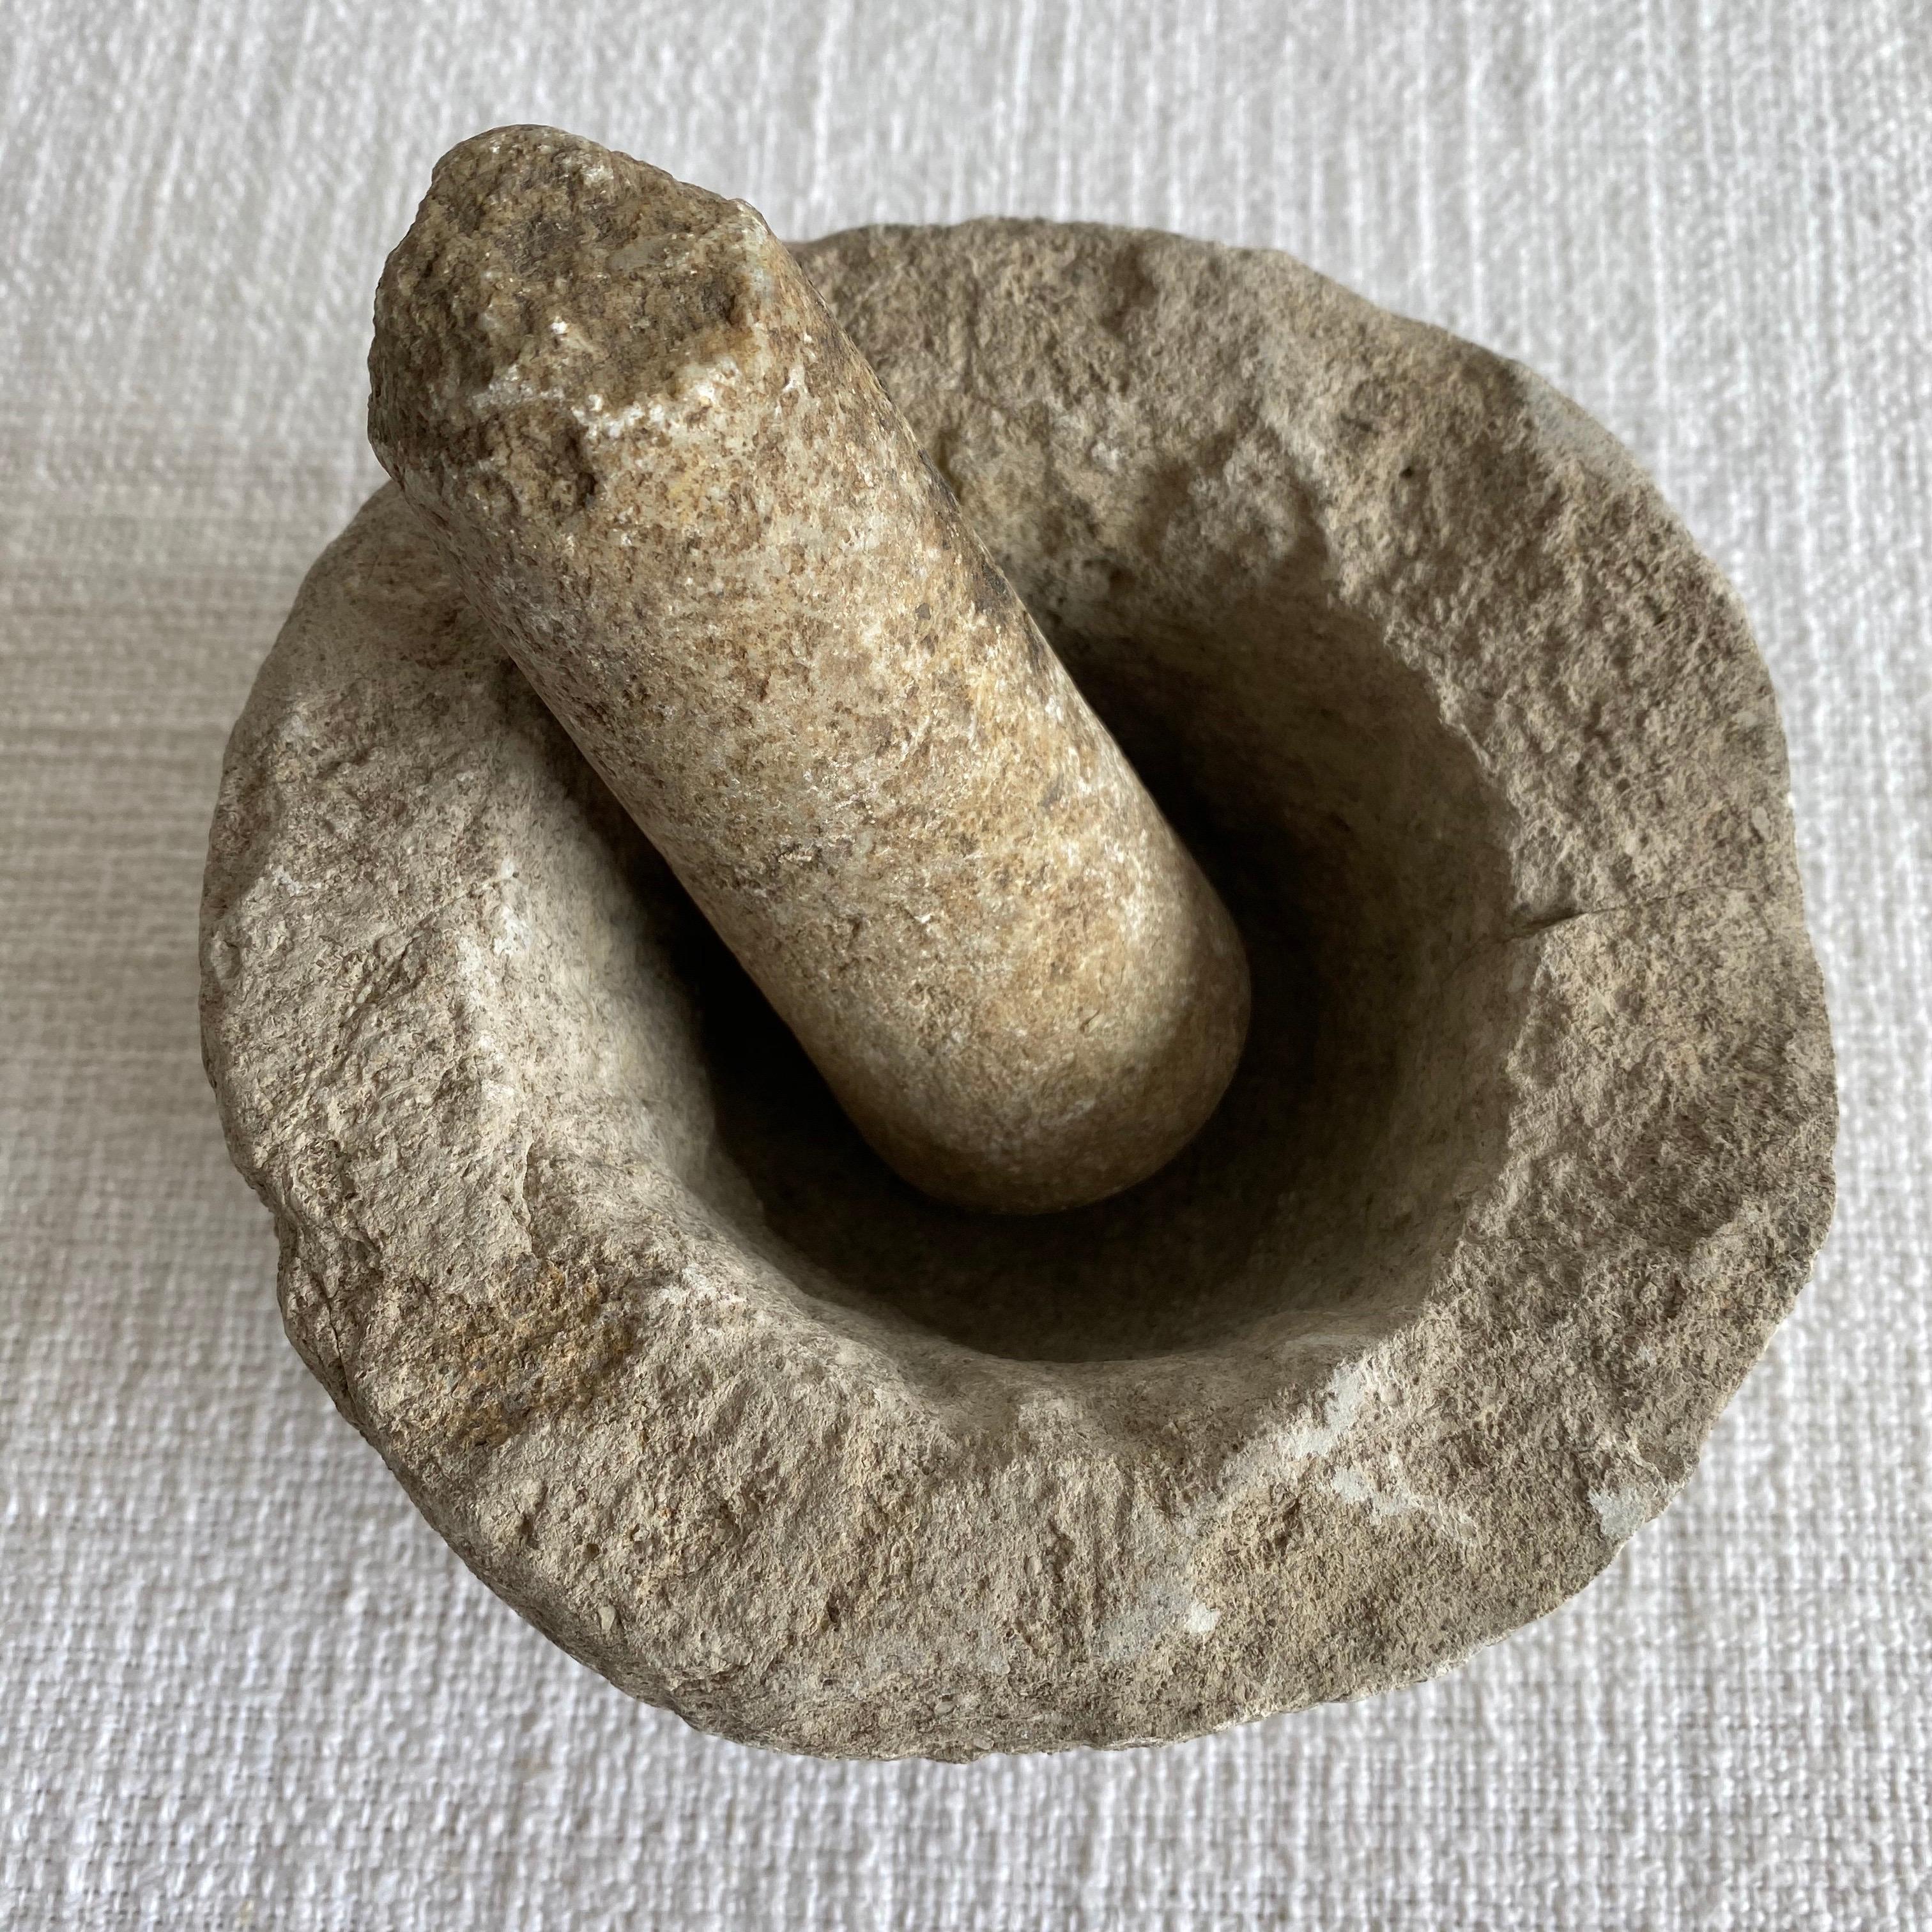 Antique stone mortar and pestle set, solid heavy stone, use as decoration, or for everyday use.
Size: 6” D x 3.5”
Weight: 10lbs.